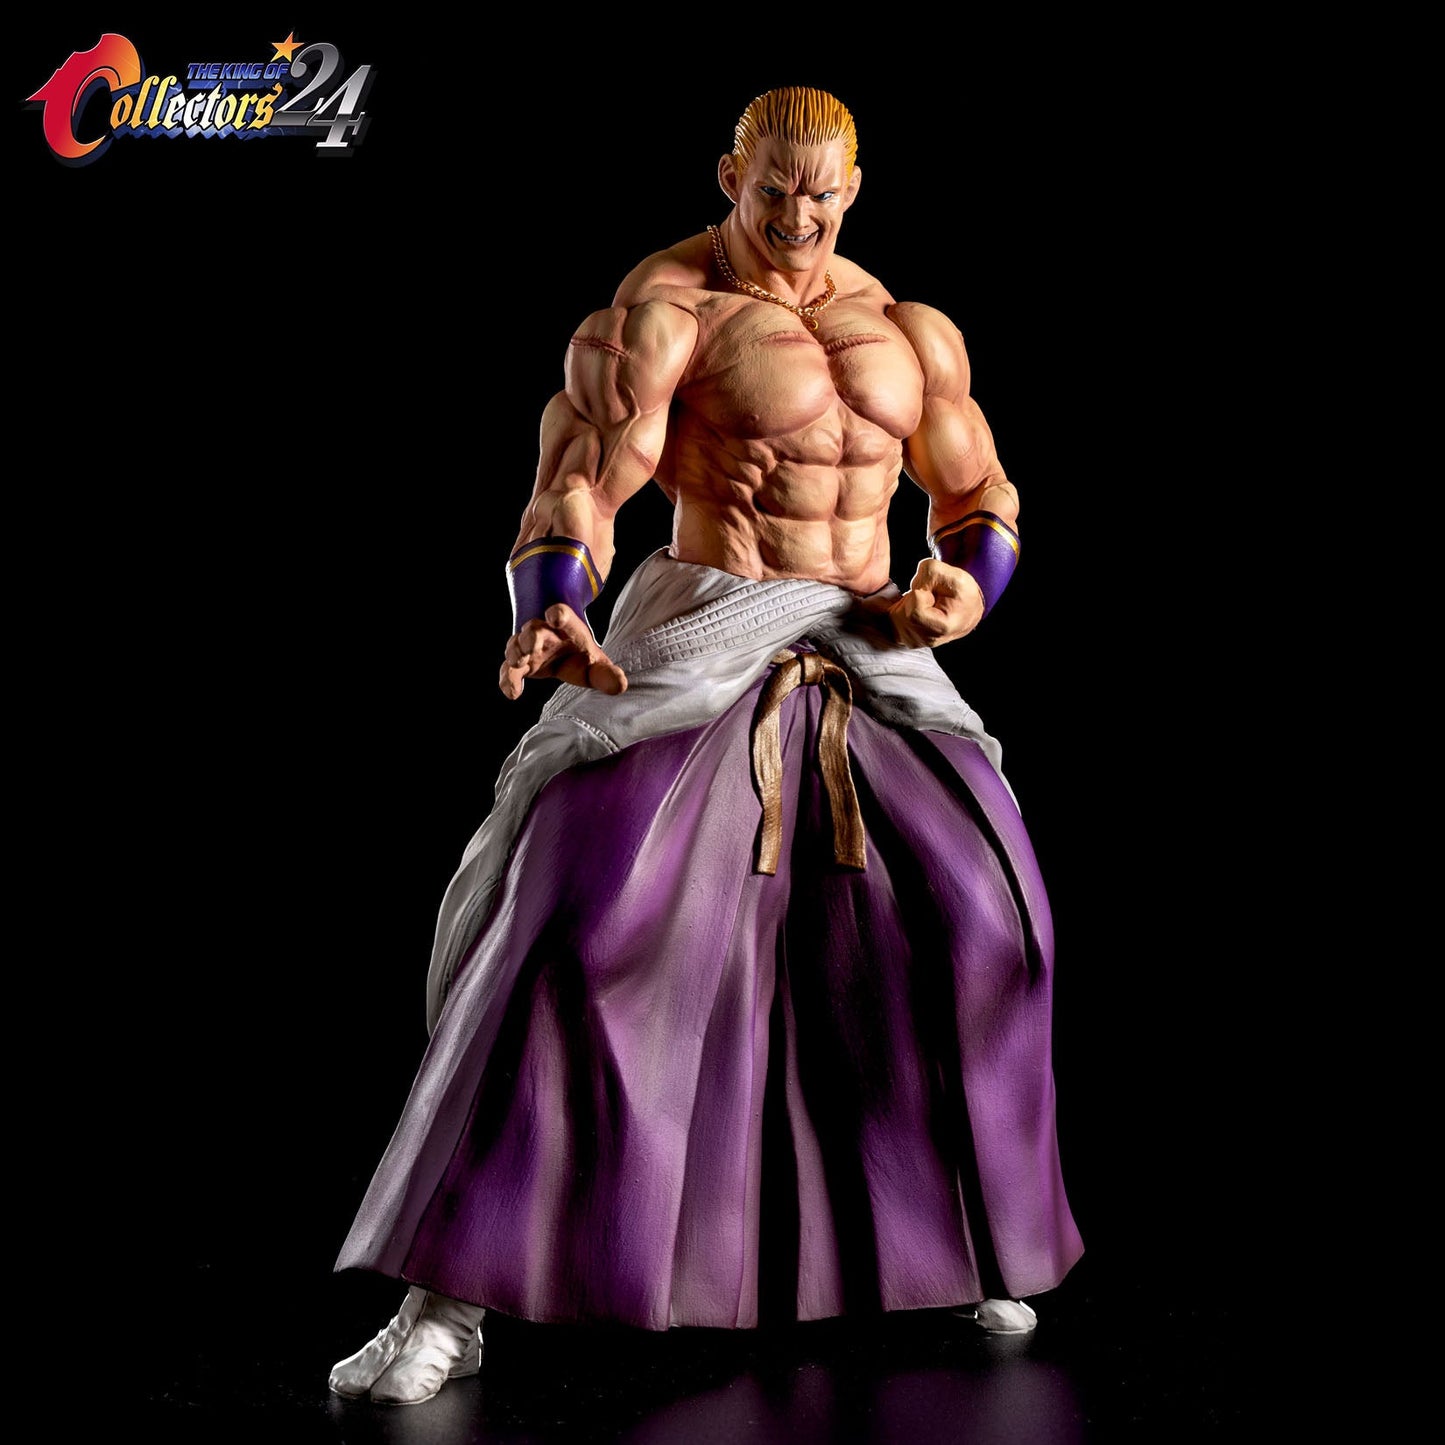 THE KING OF COLLECTORS'24 No.2 "Geese Howard" (2P color) | animota